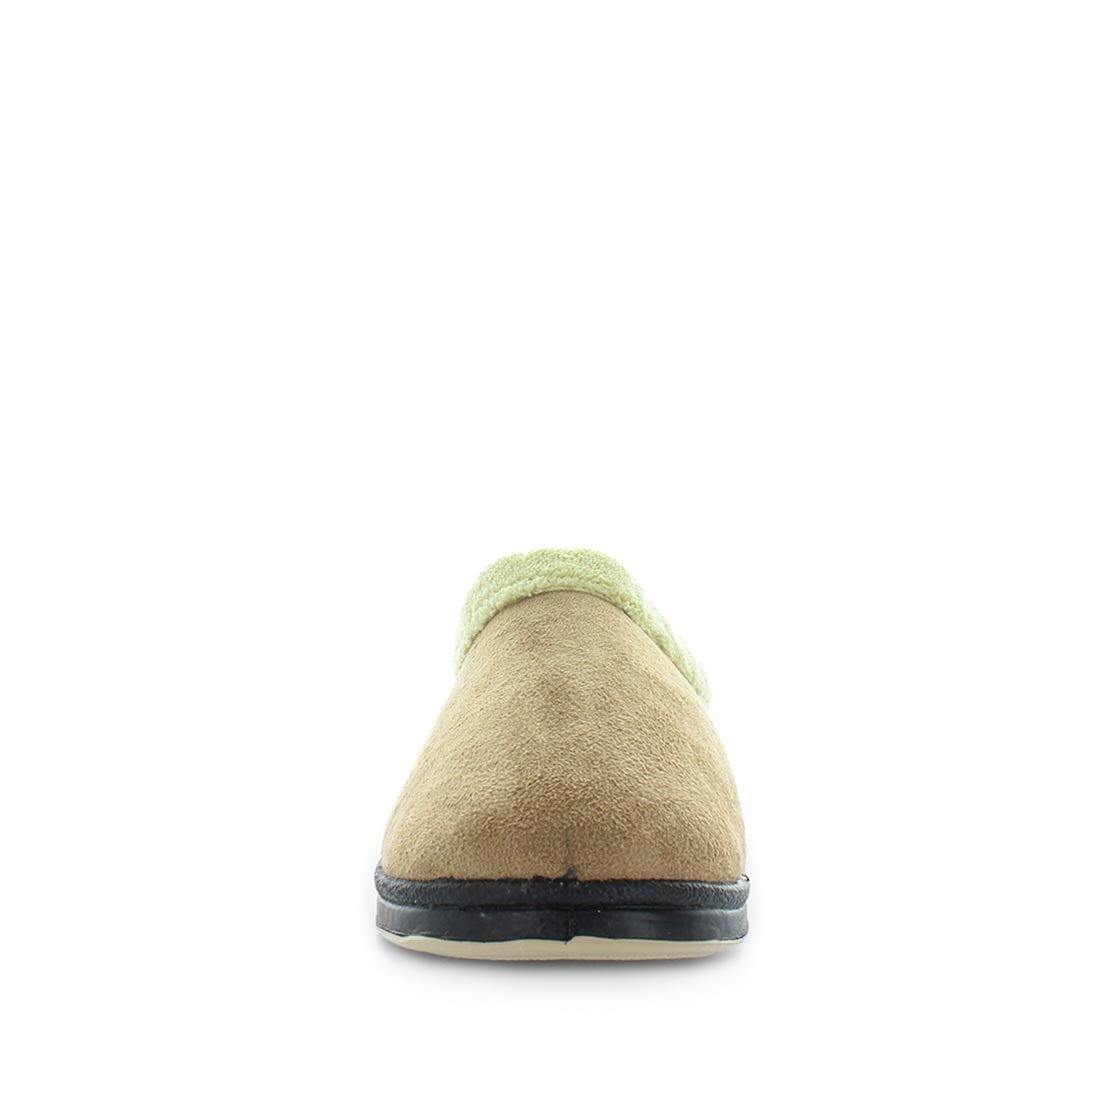 Load image into Gallery viewer, womens slippers - camel Endy slipper, by panda Slippers. A scuff style slipper with a micro-terry design for warmth and an extra comfy fit with anon slip sole.
